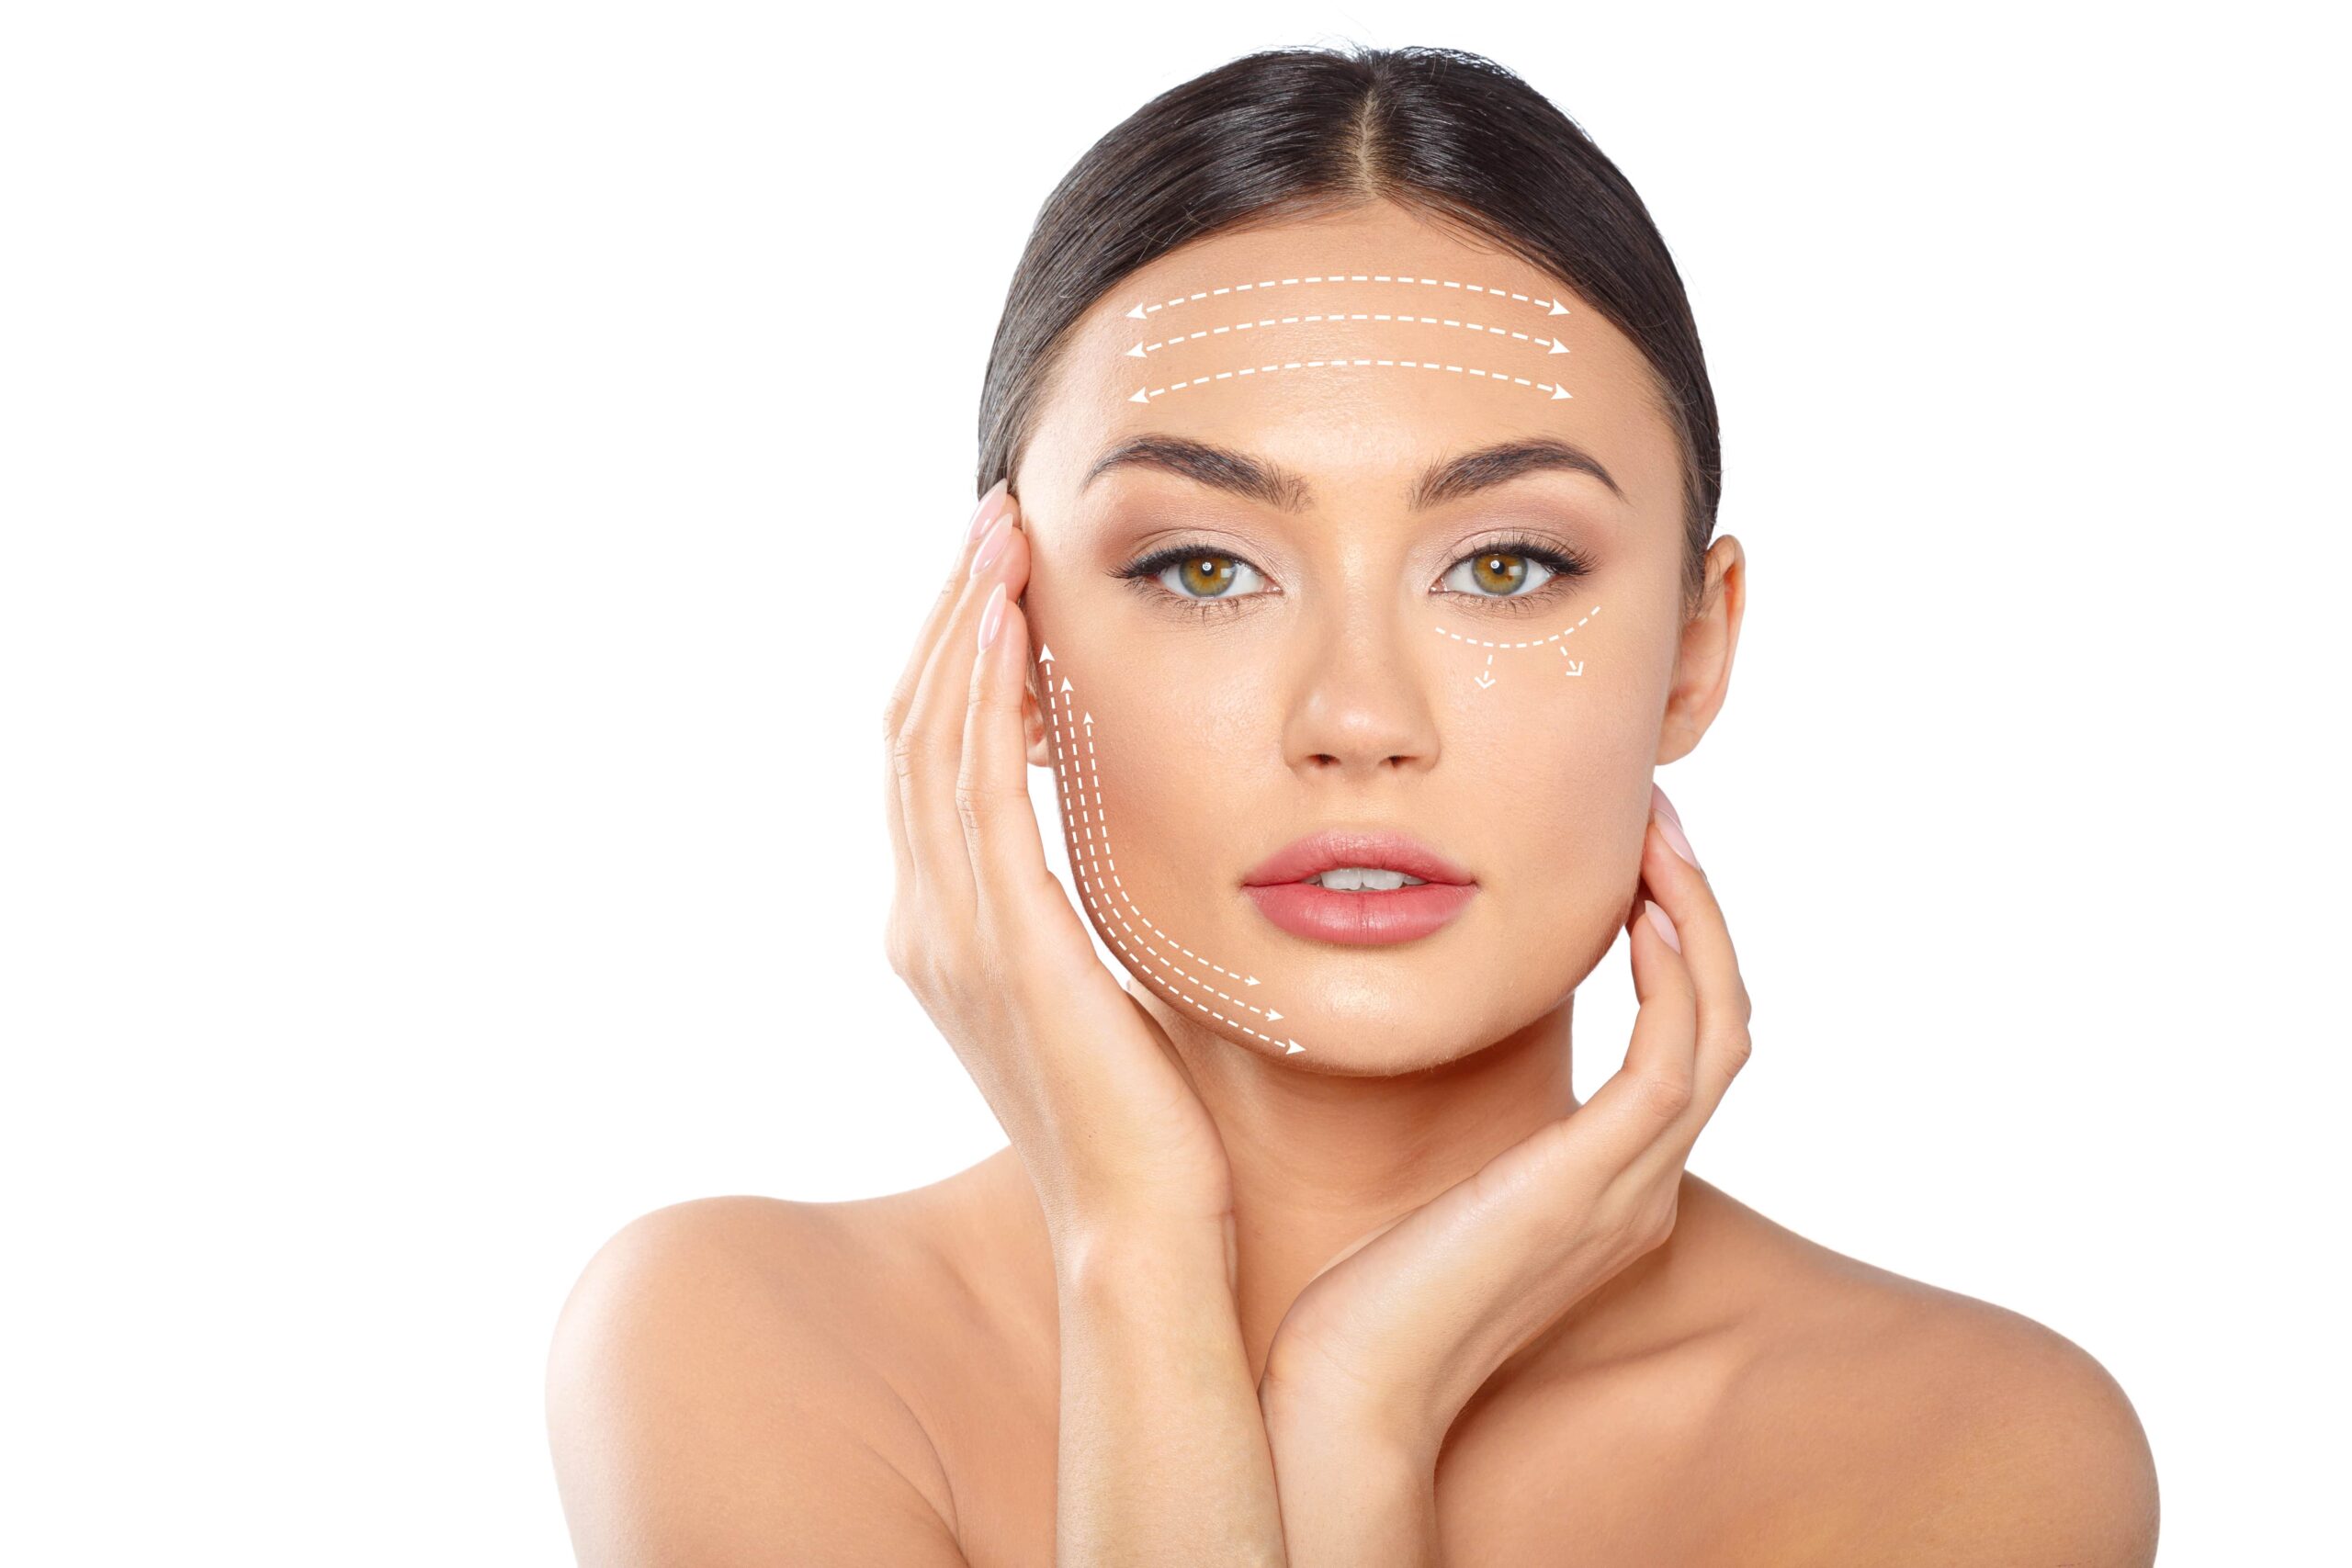 What is Cosmetic Surgery?